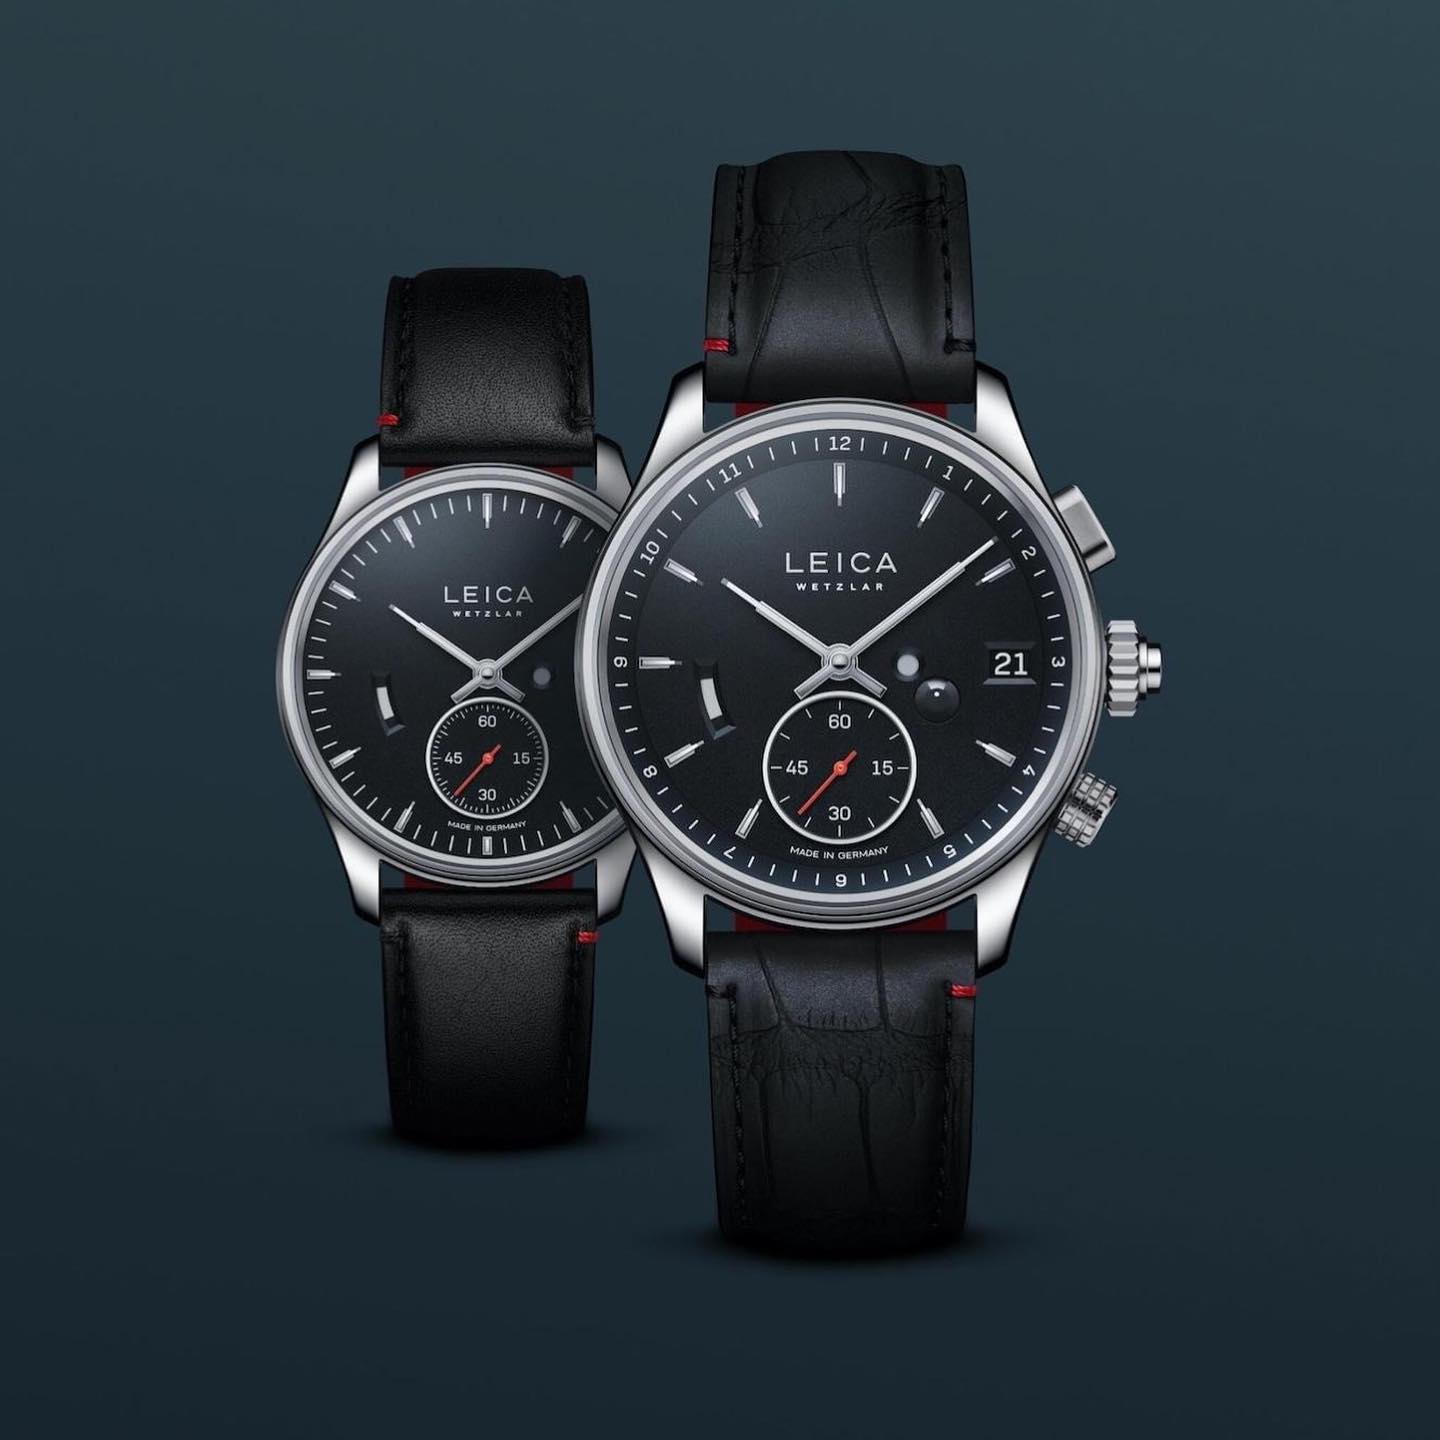 Leica L1 and Leica L2 watches (2022)